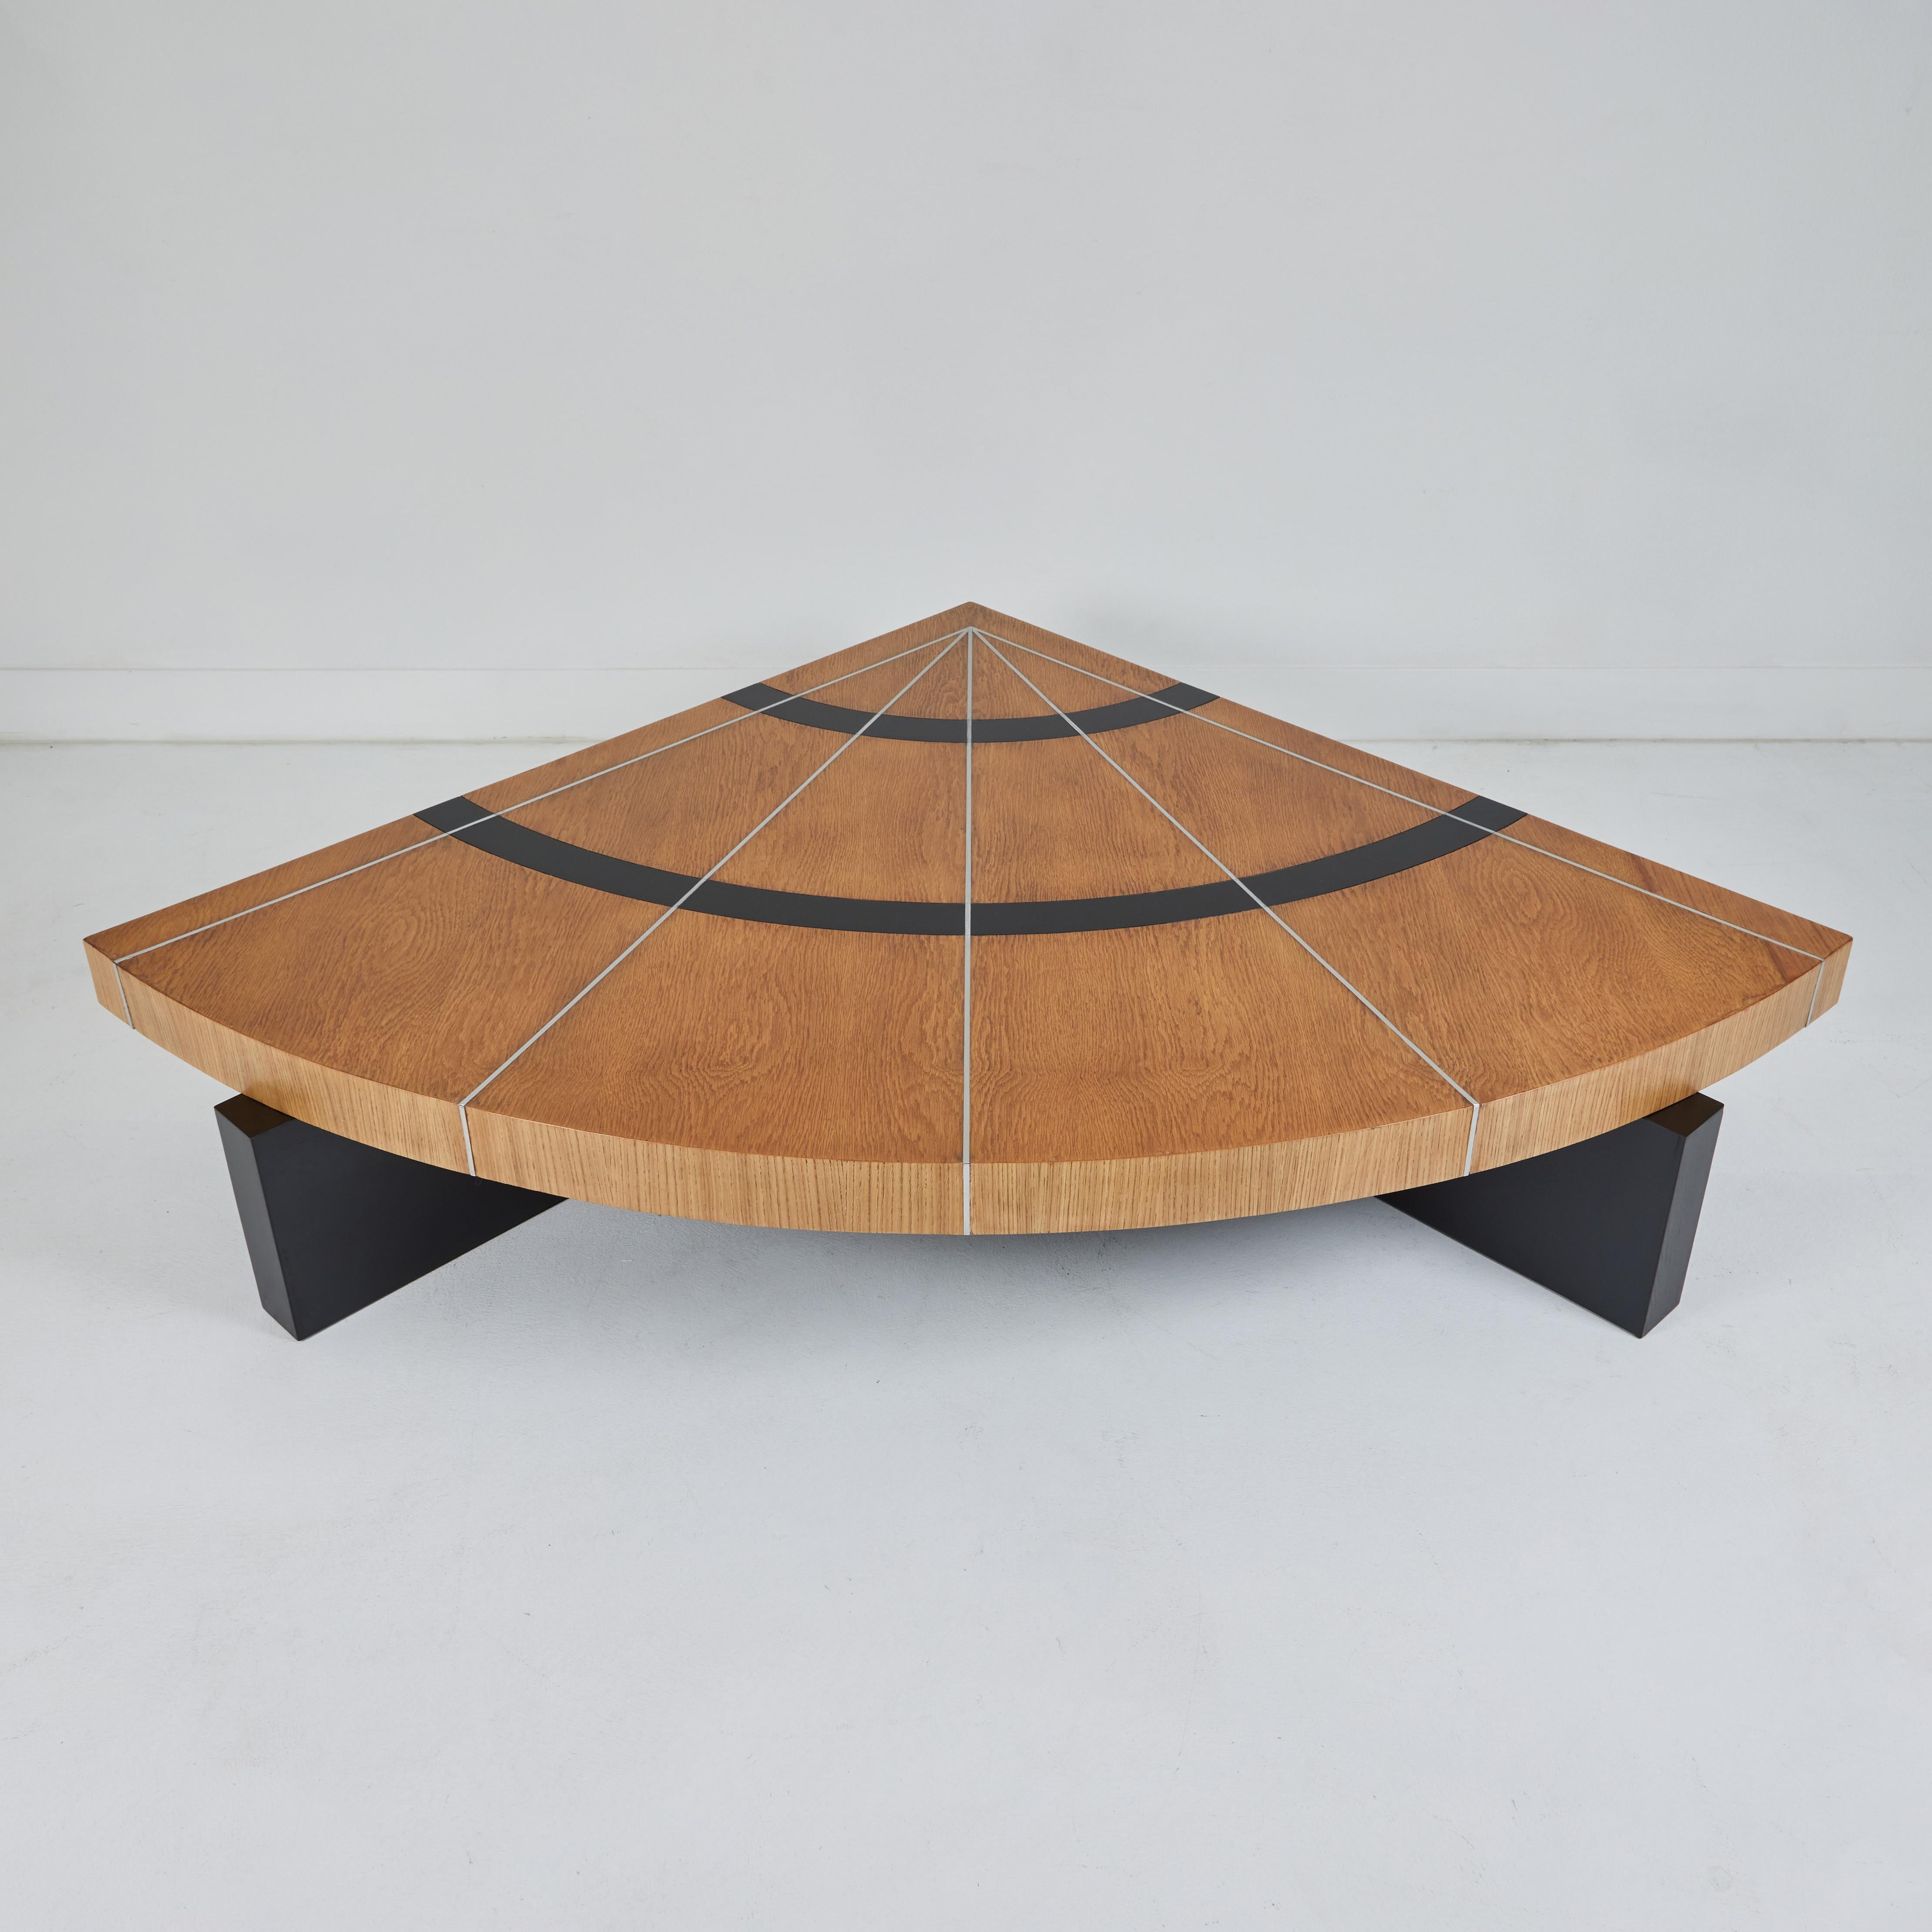 Stained Modernist Inlaid Cocktail Table, Designed by William Haines